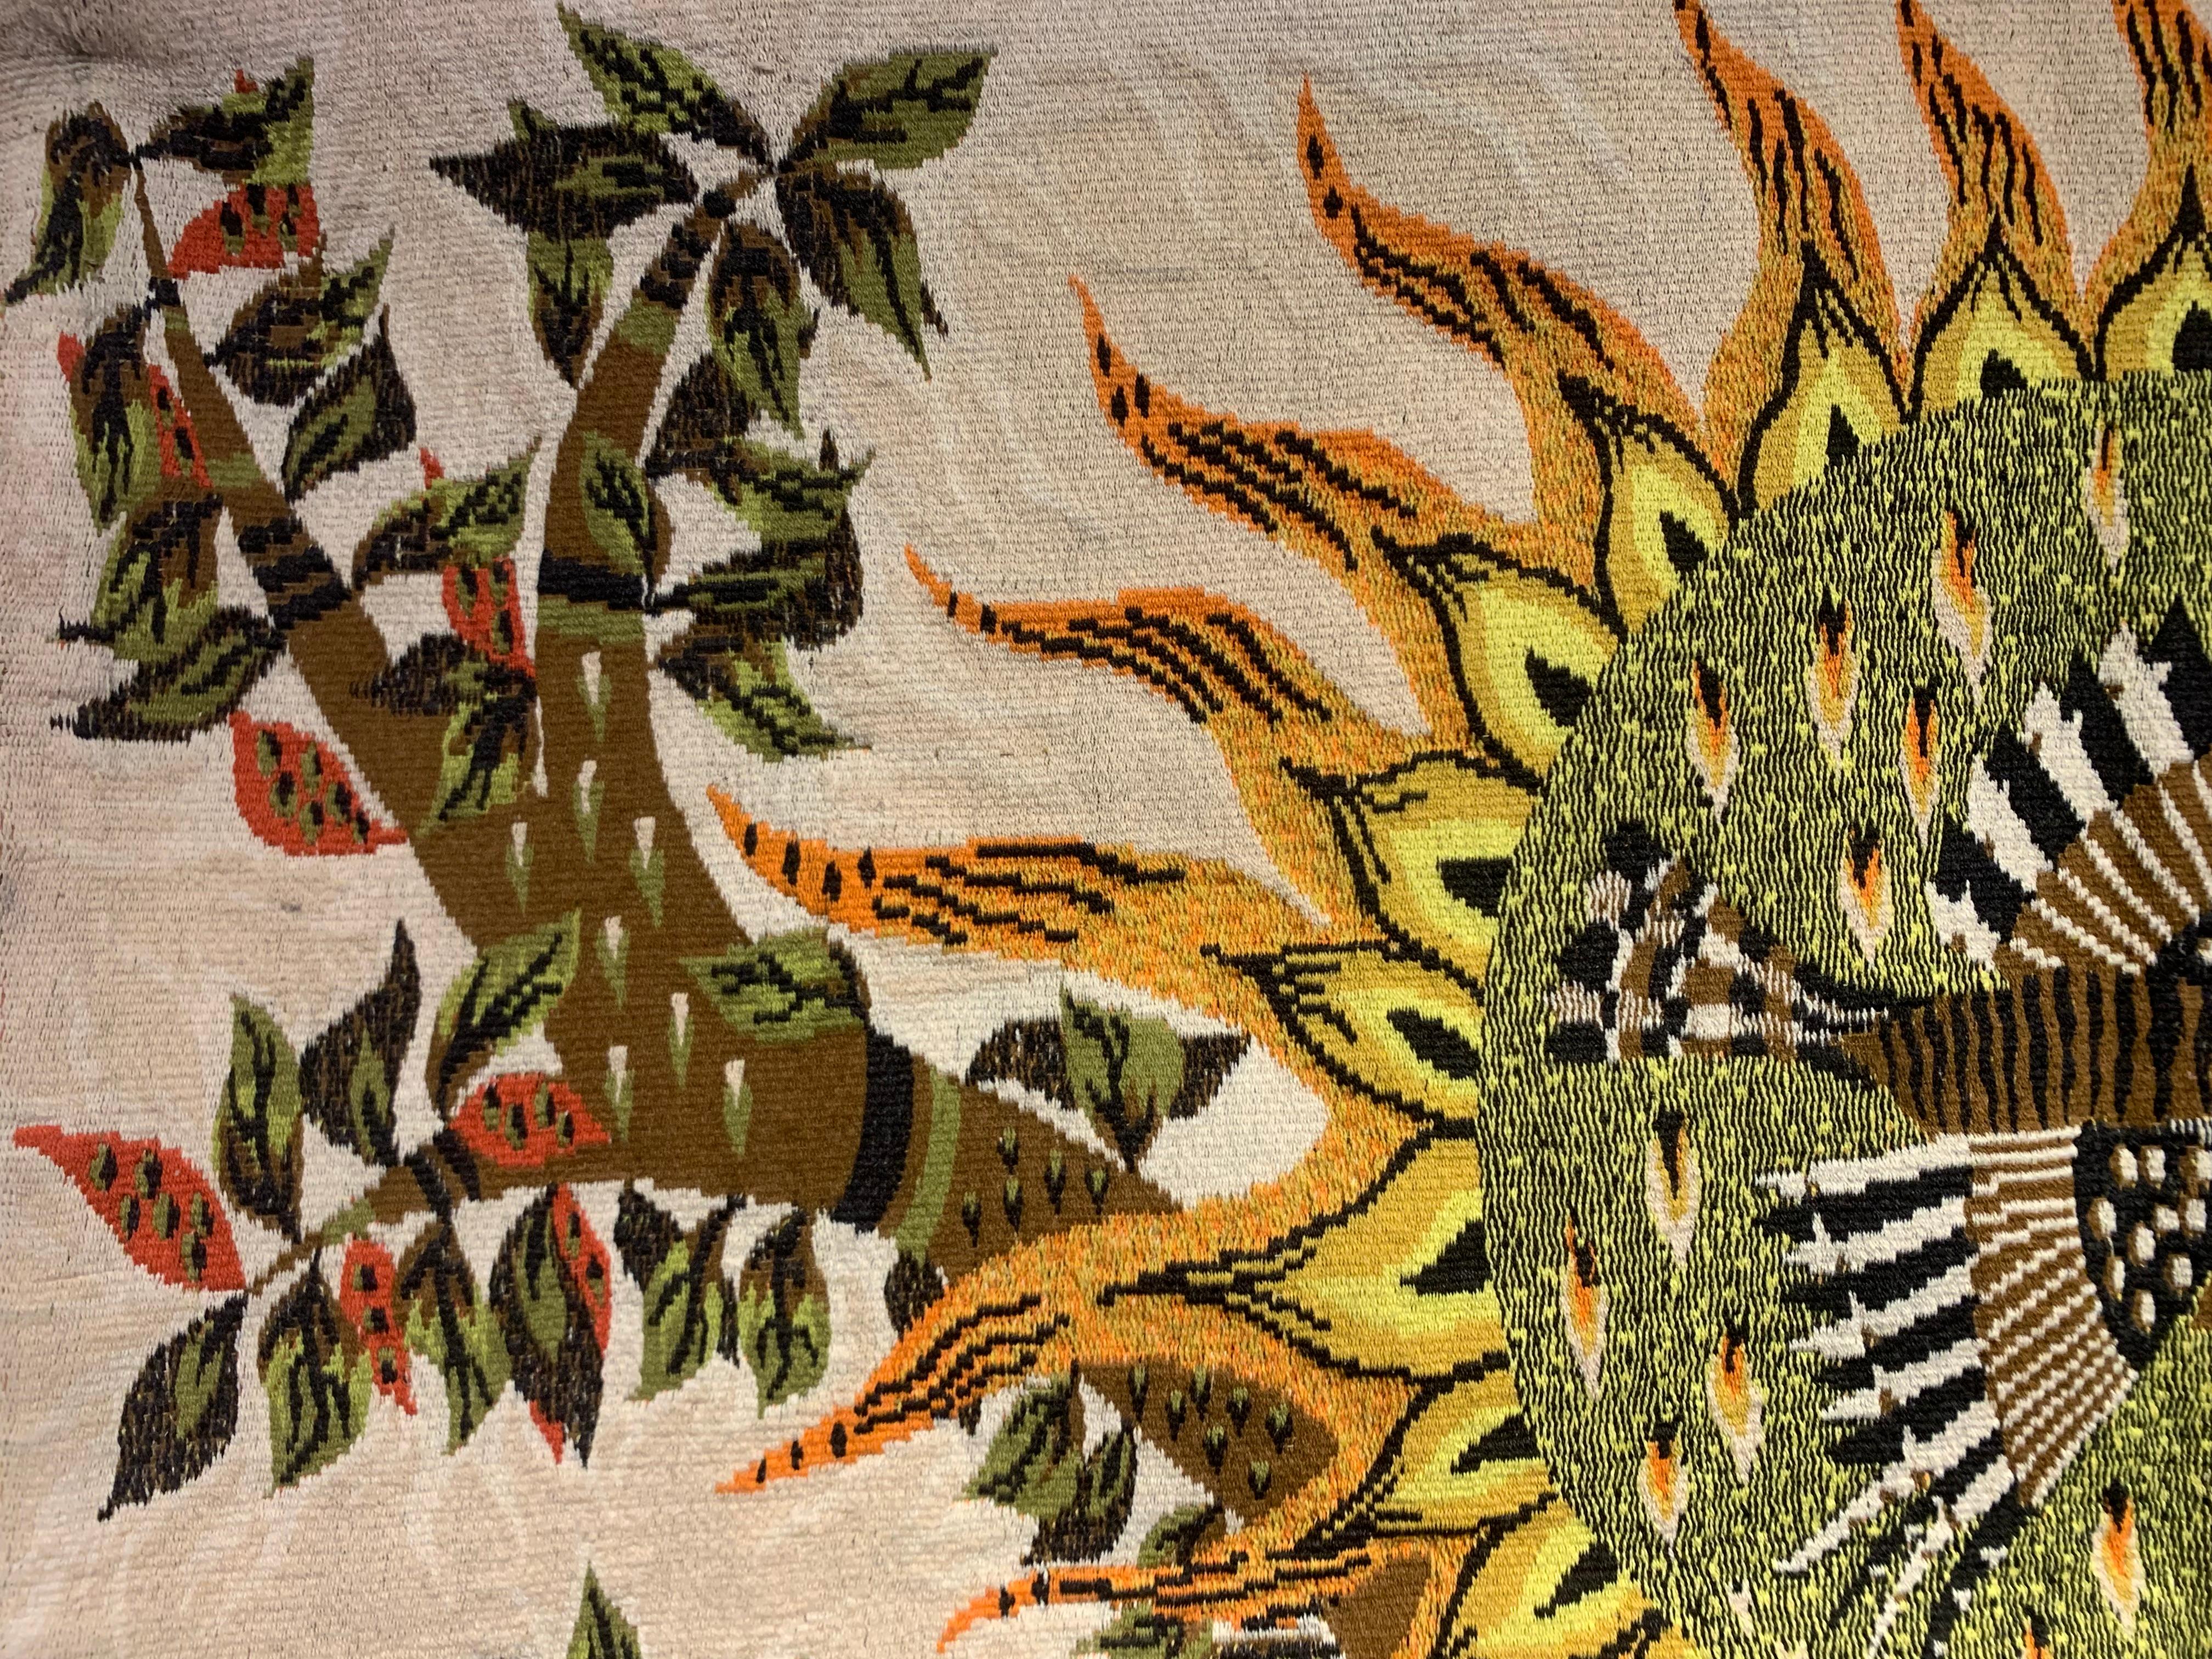 Decorative vintage tapestry signed M.Ray.
Entitled ‘Aube’. Woven wool signed by the artist in the lower right corner. 
Depicting a nature scene, using earthly colors, of trees with a beautiful bird flying around the sun.
Dimensions: W 145 cm, H